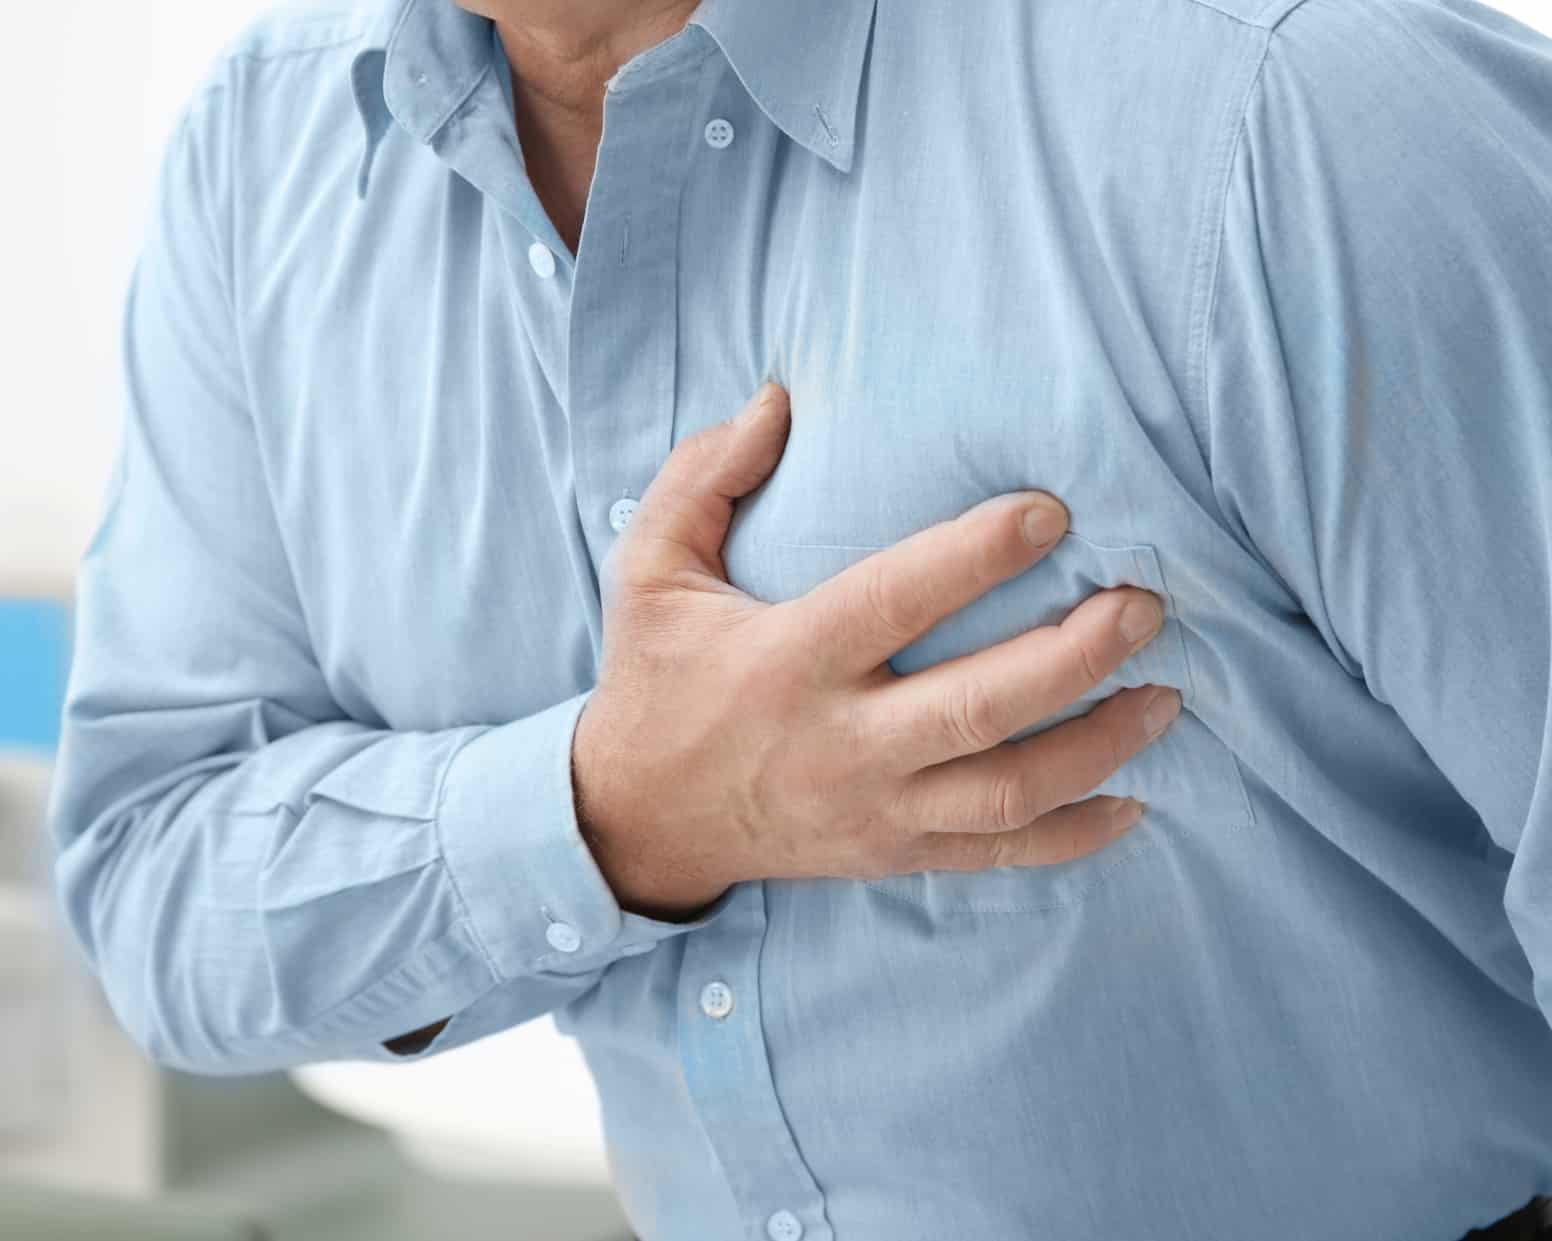 How To Tell If Your Chest Pain Is Muscular?